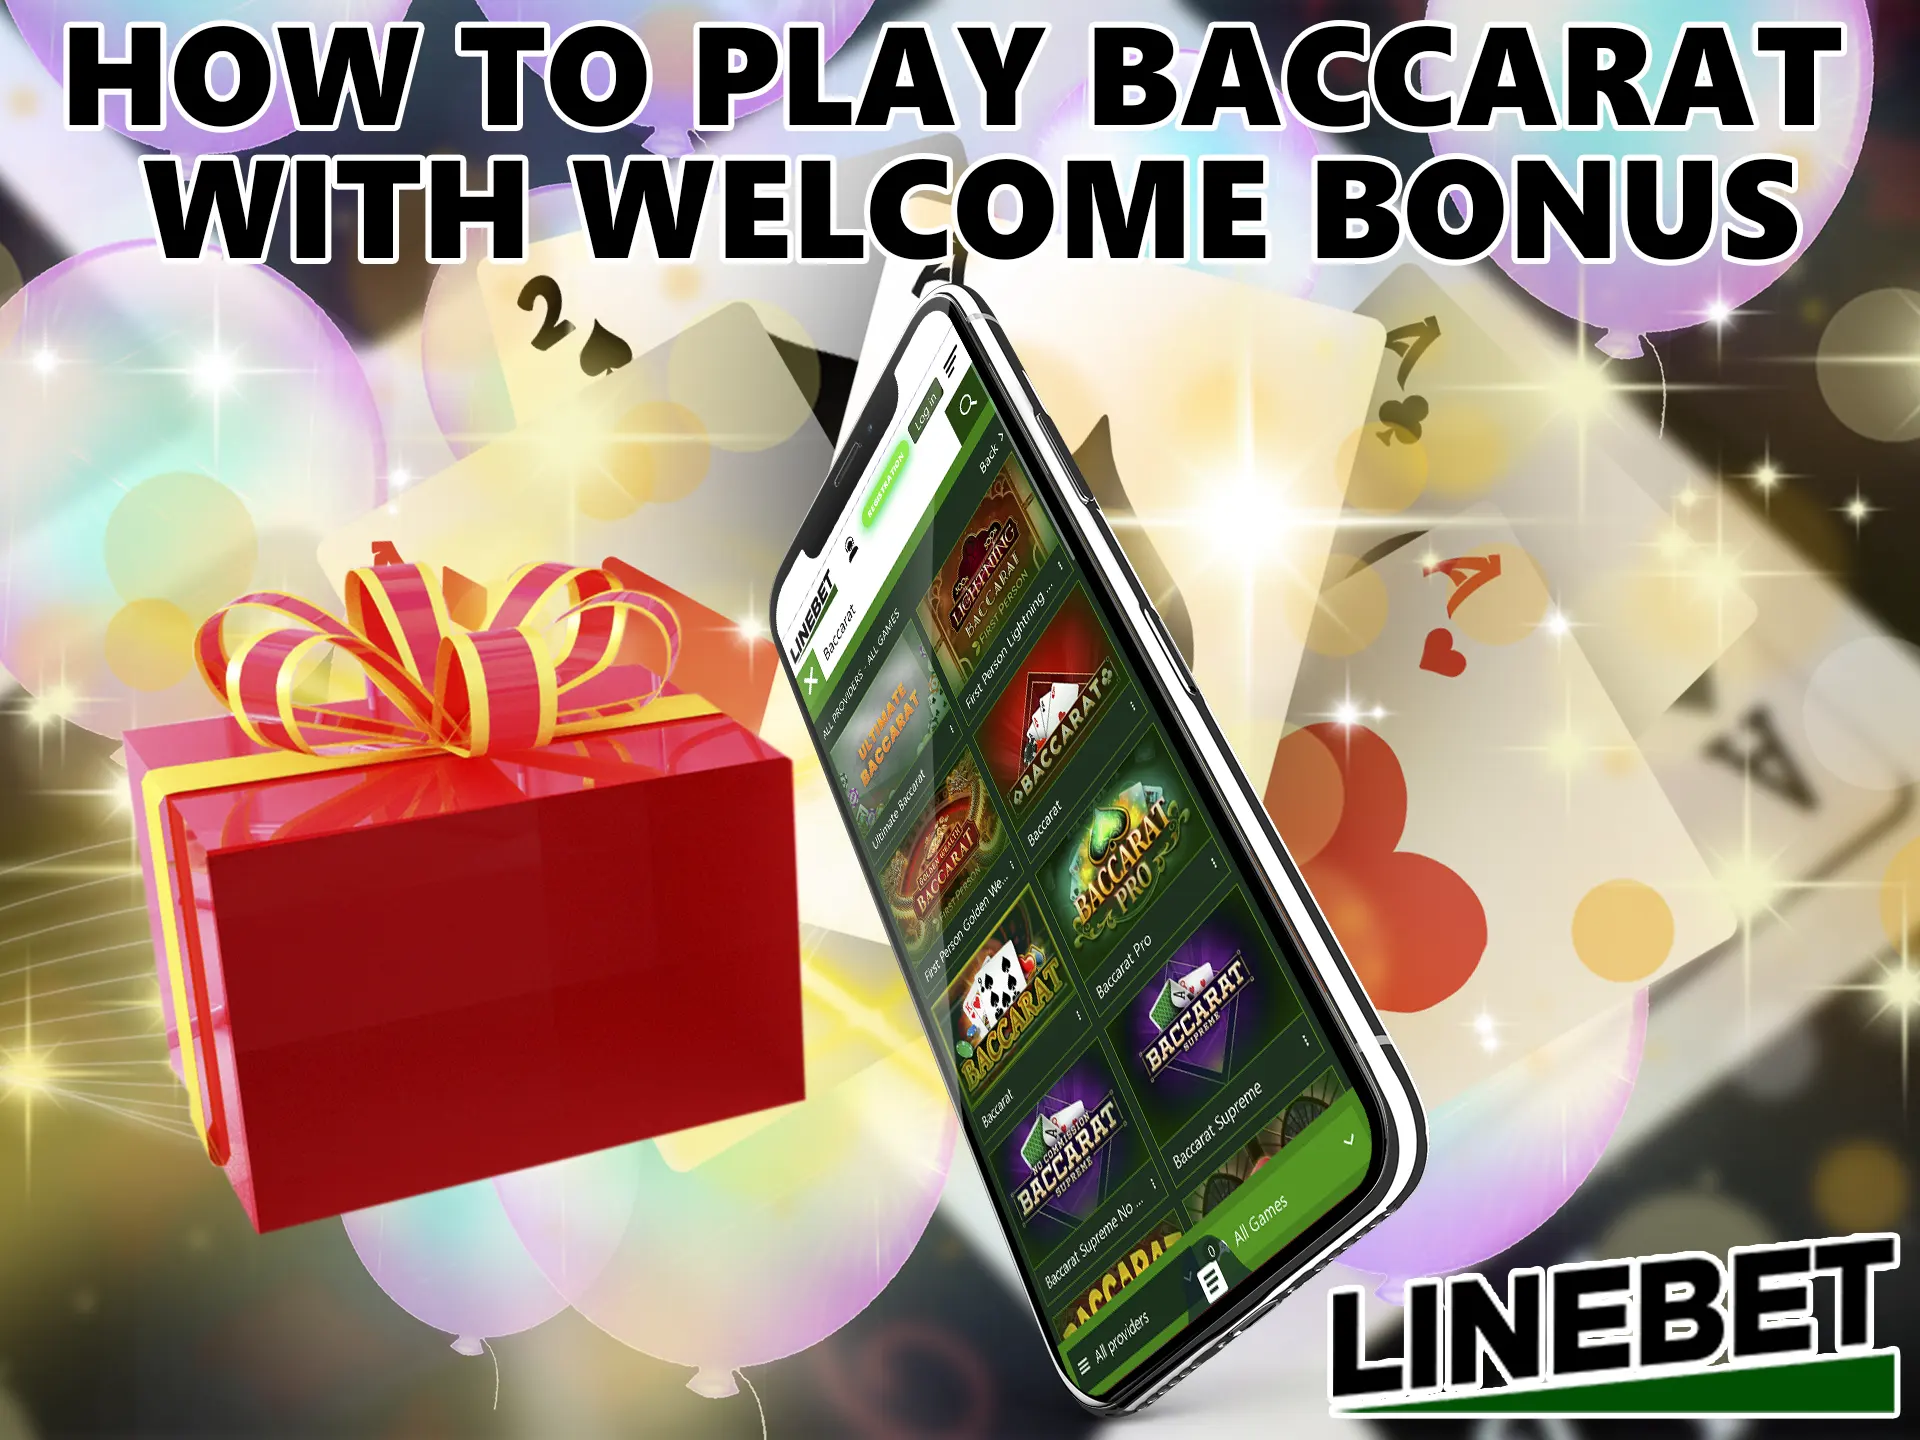 Indian players will get special offers from Linebet that are available through its Bonus Programme and covers entertainment as well as special events and tournaments.